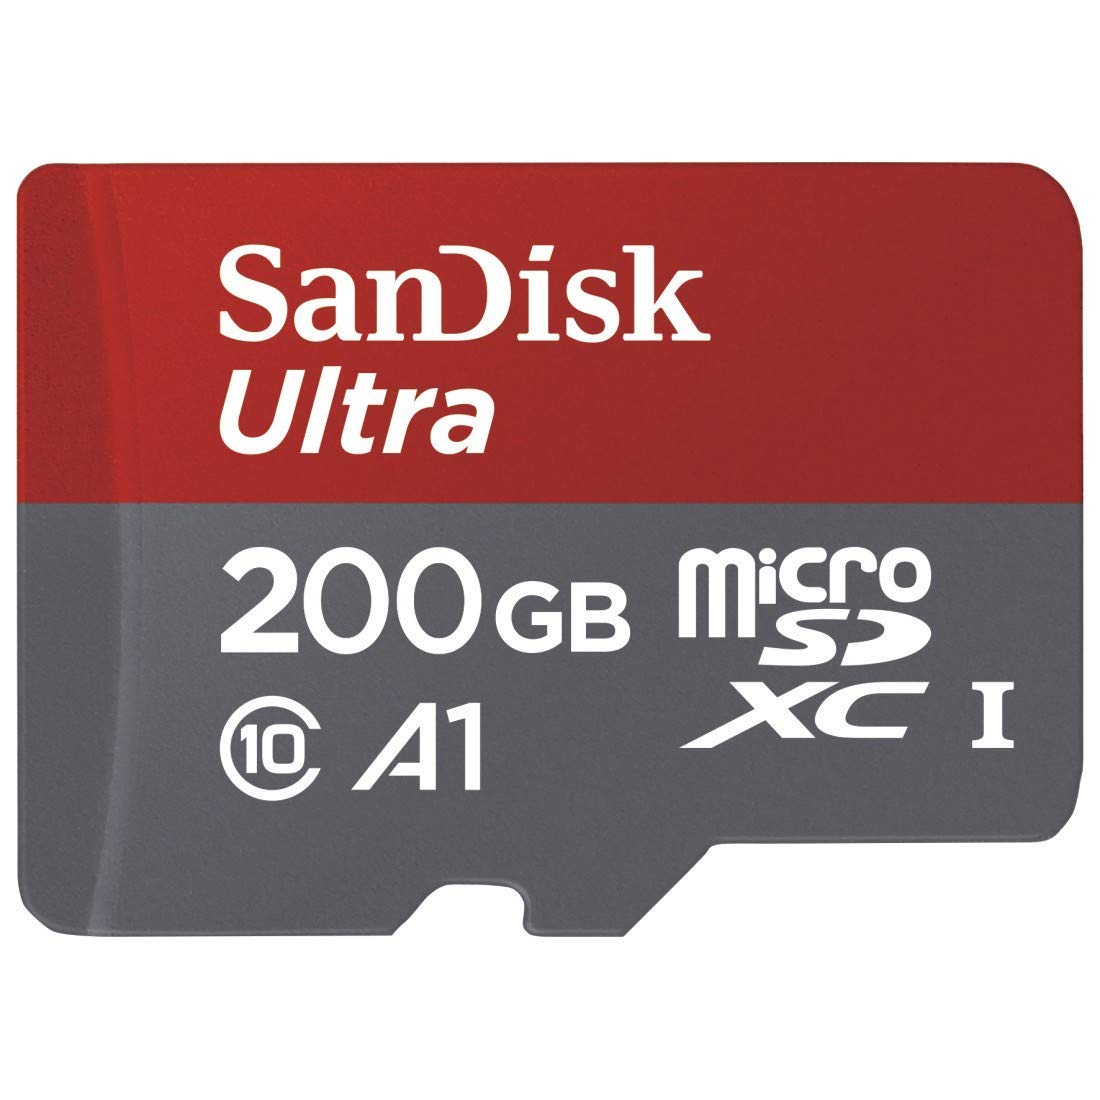 Get a 200GB SanDisk microSD Card for Just $25 [Deal]